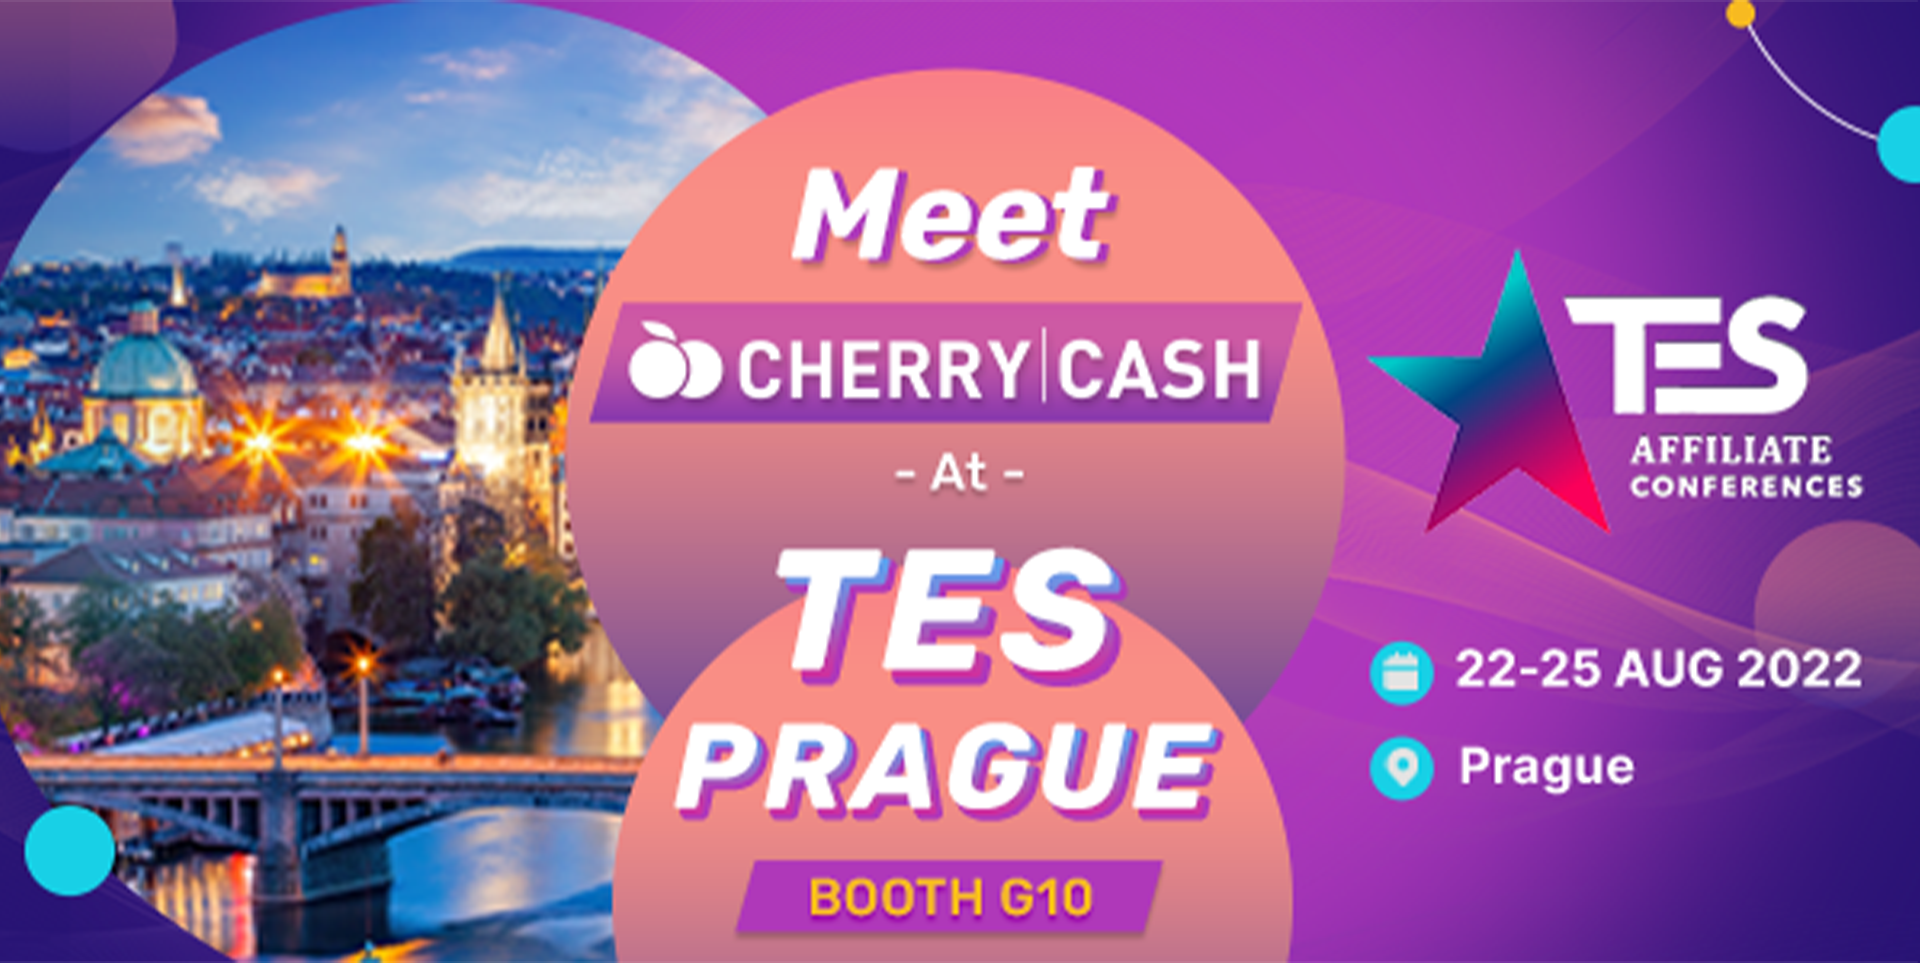 Meet Cherry.tv at TES in Prague from August 22-25th!